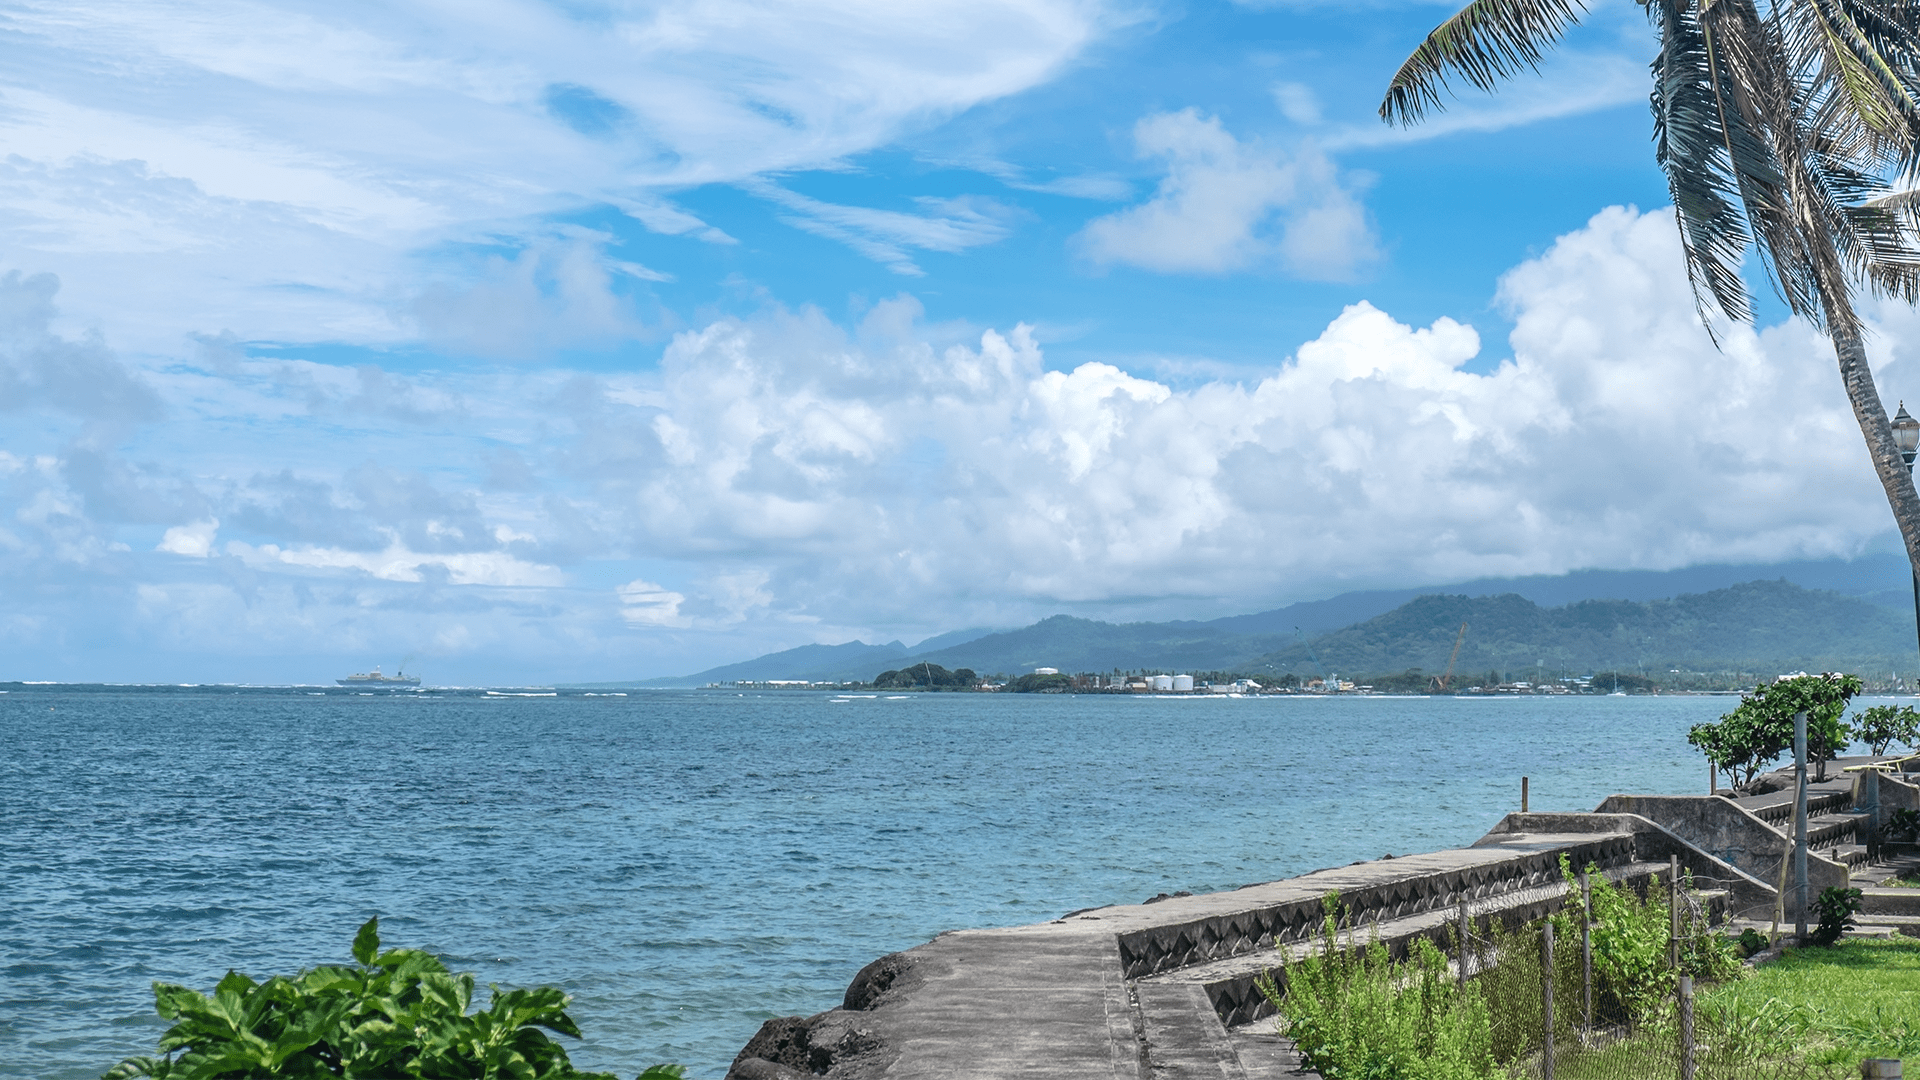 Apia harbour and waterfront, with commercial shipping port and container ship in background - Samoa, Upolu Island, South Pacific 